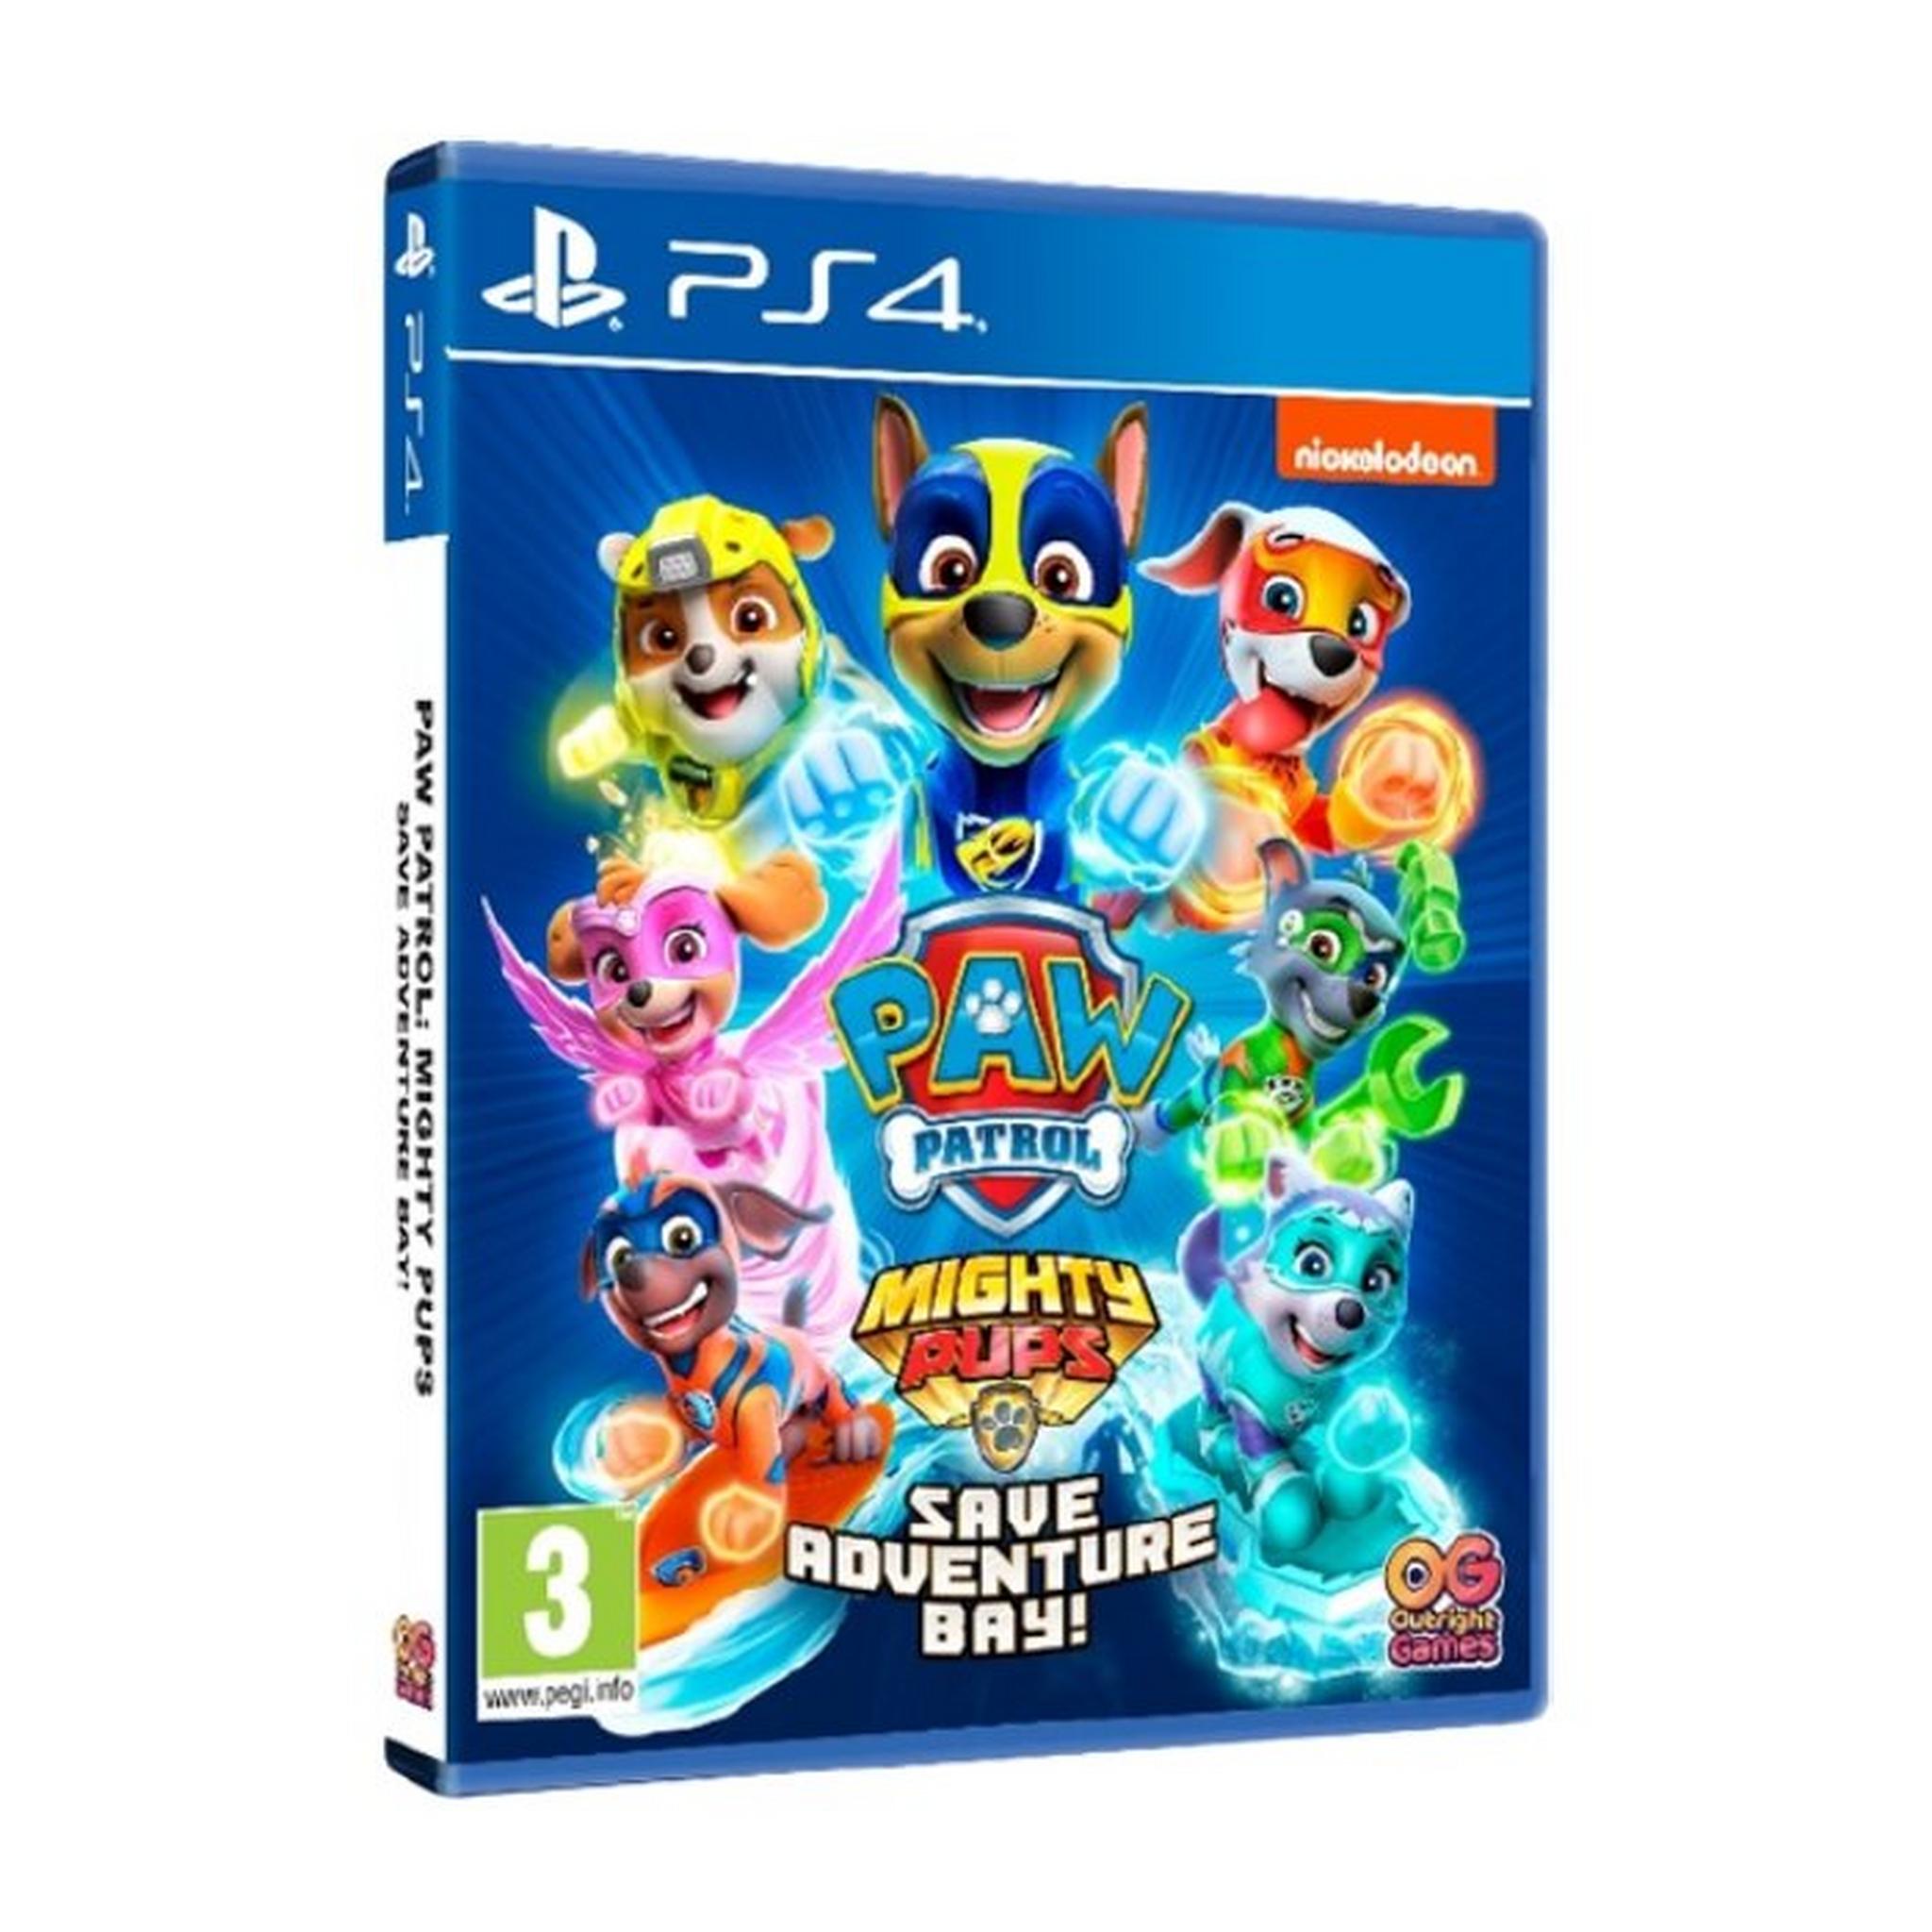 Paw Patrol: Mighty Pups Save Adventure Bay - PS4 Game